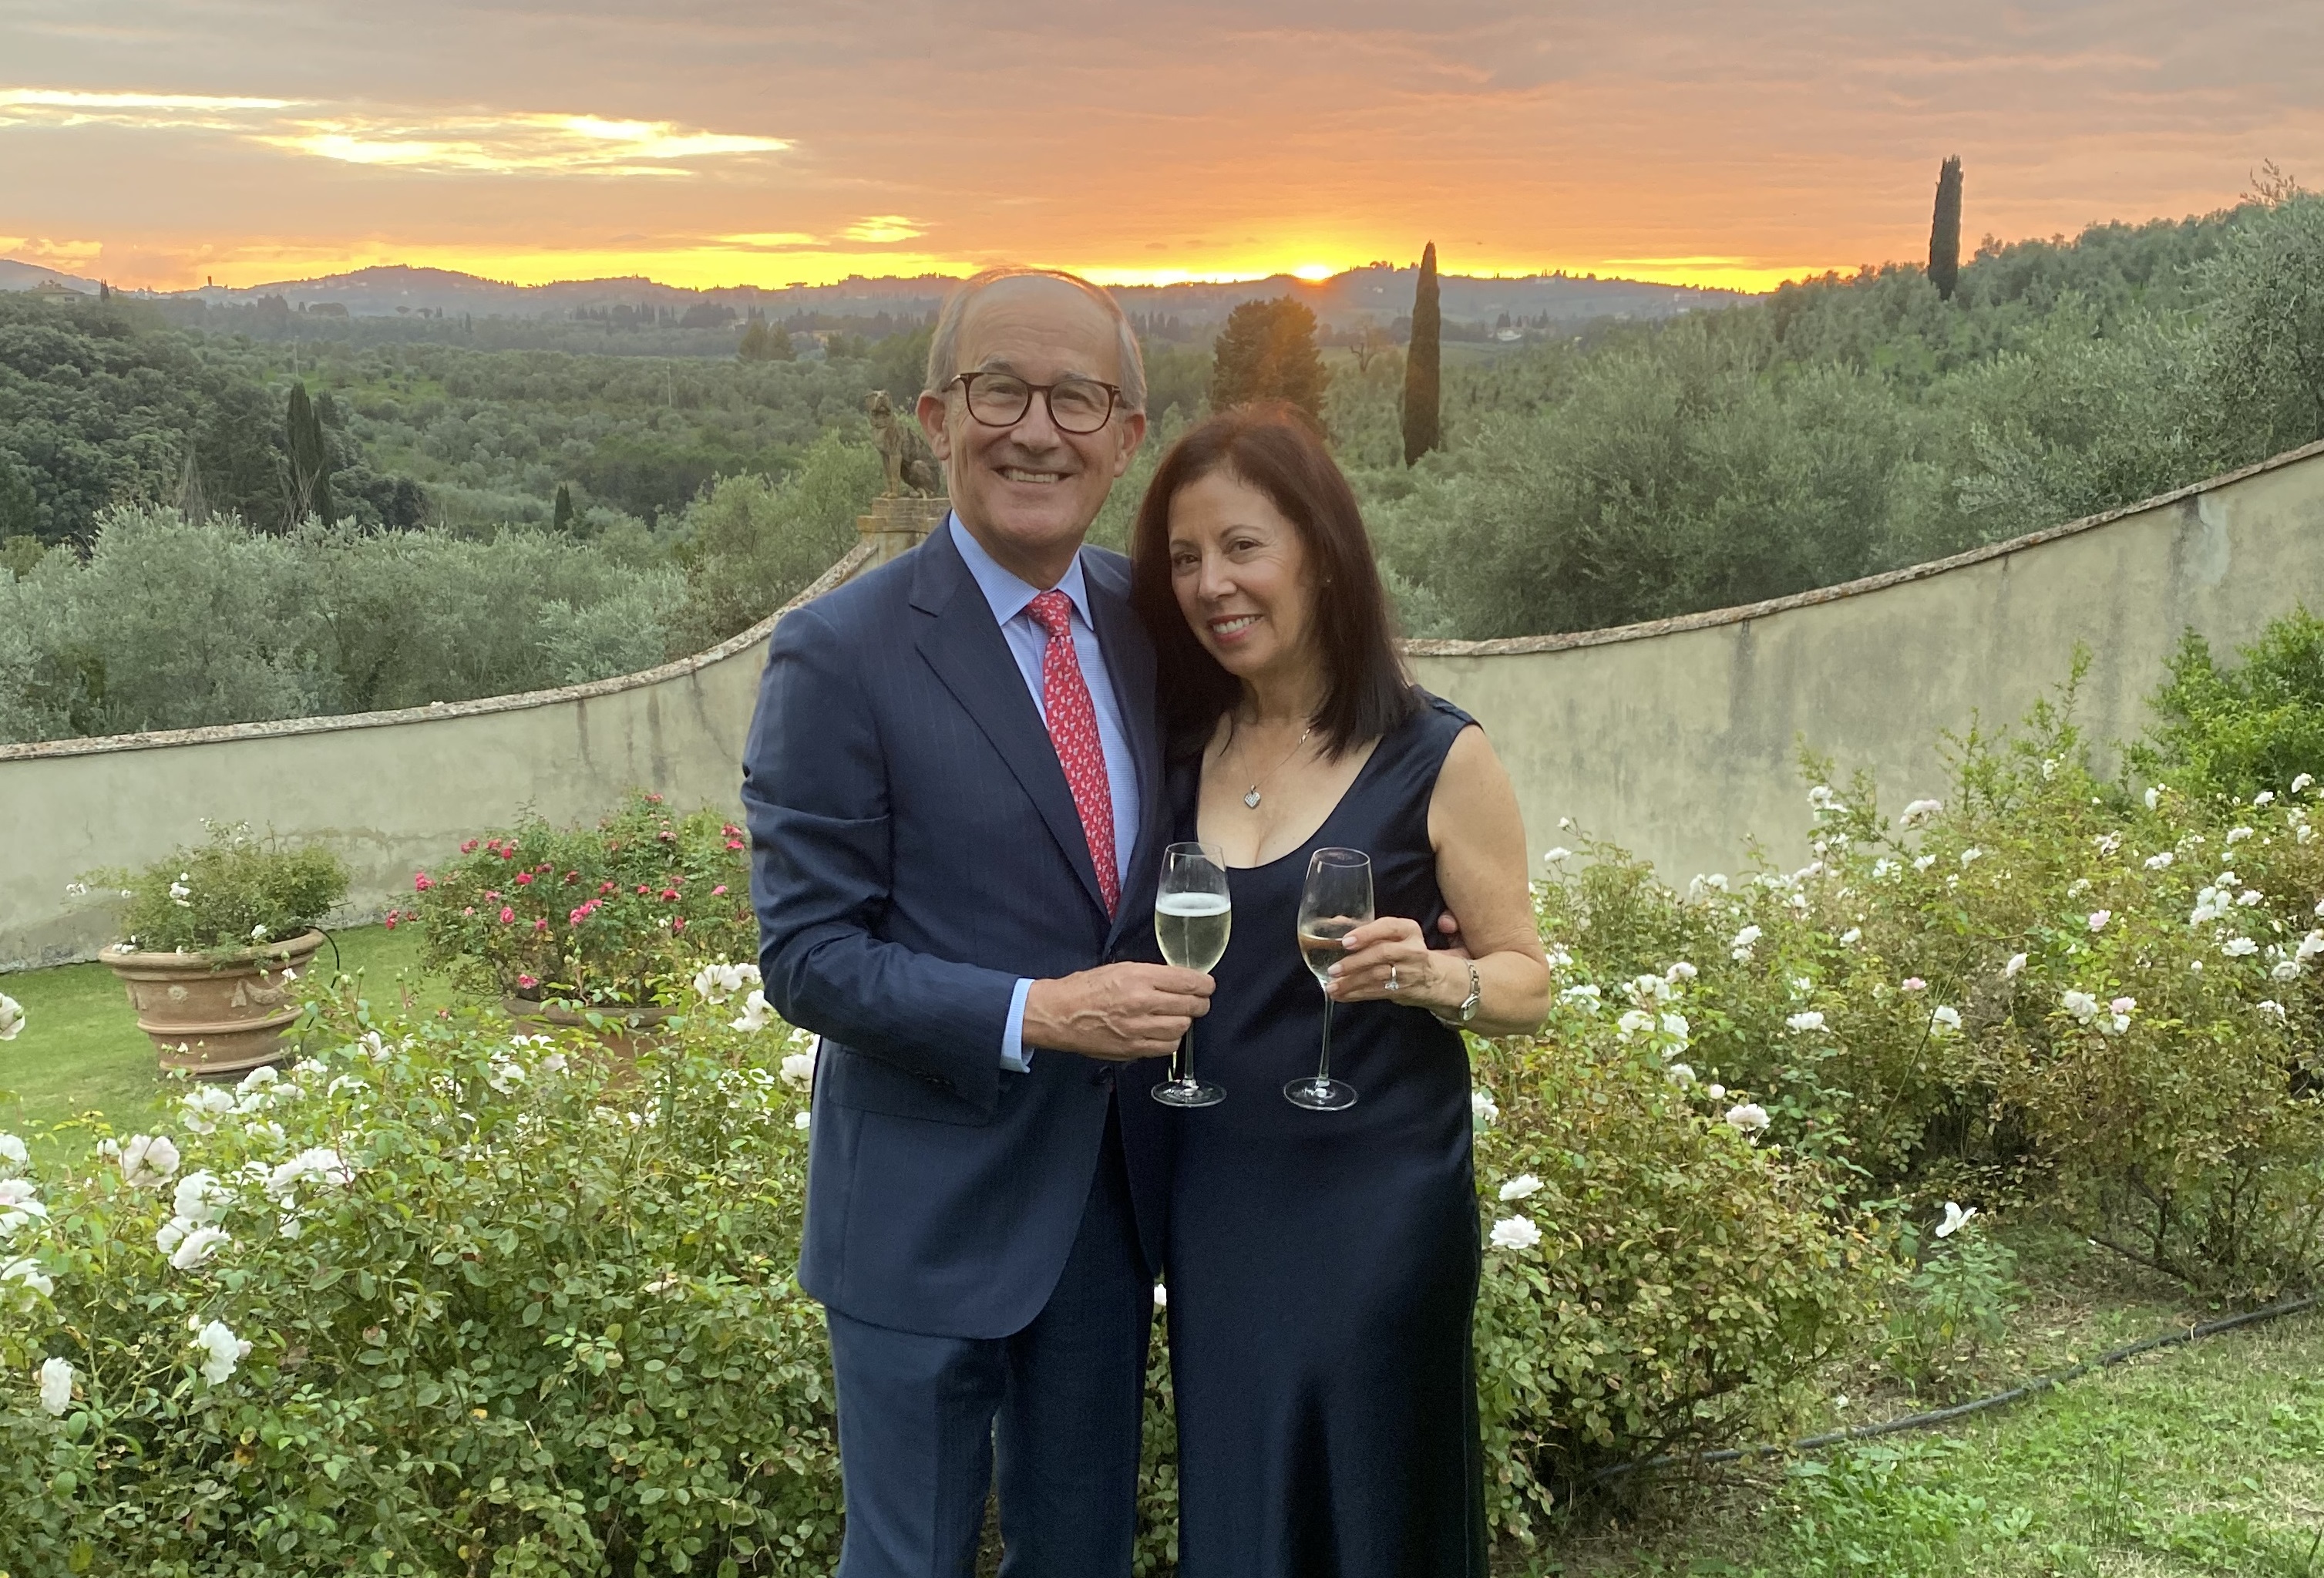 Enjoying the sunset and wine on a recent trip to Italy.